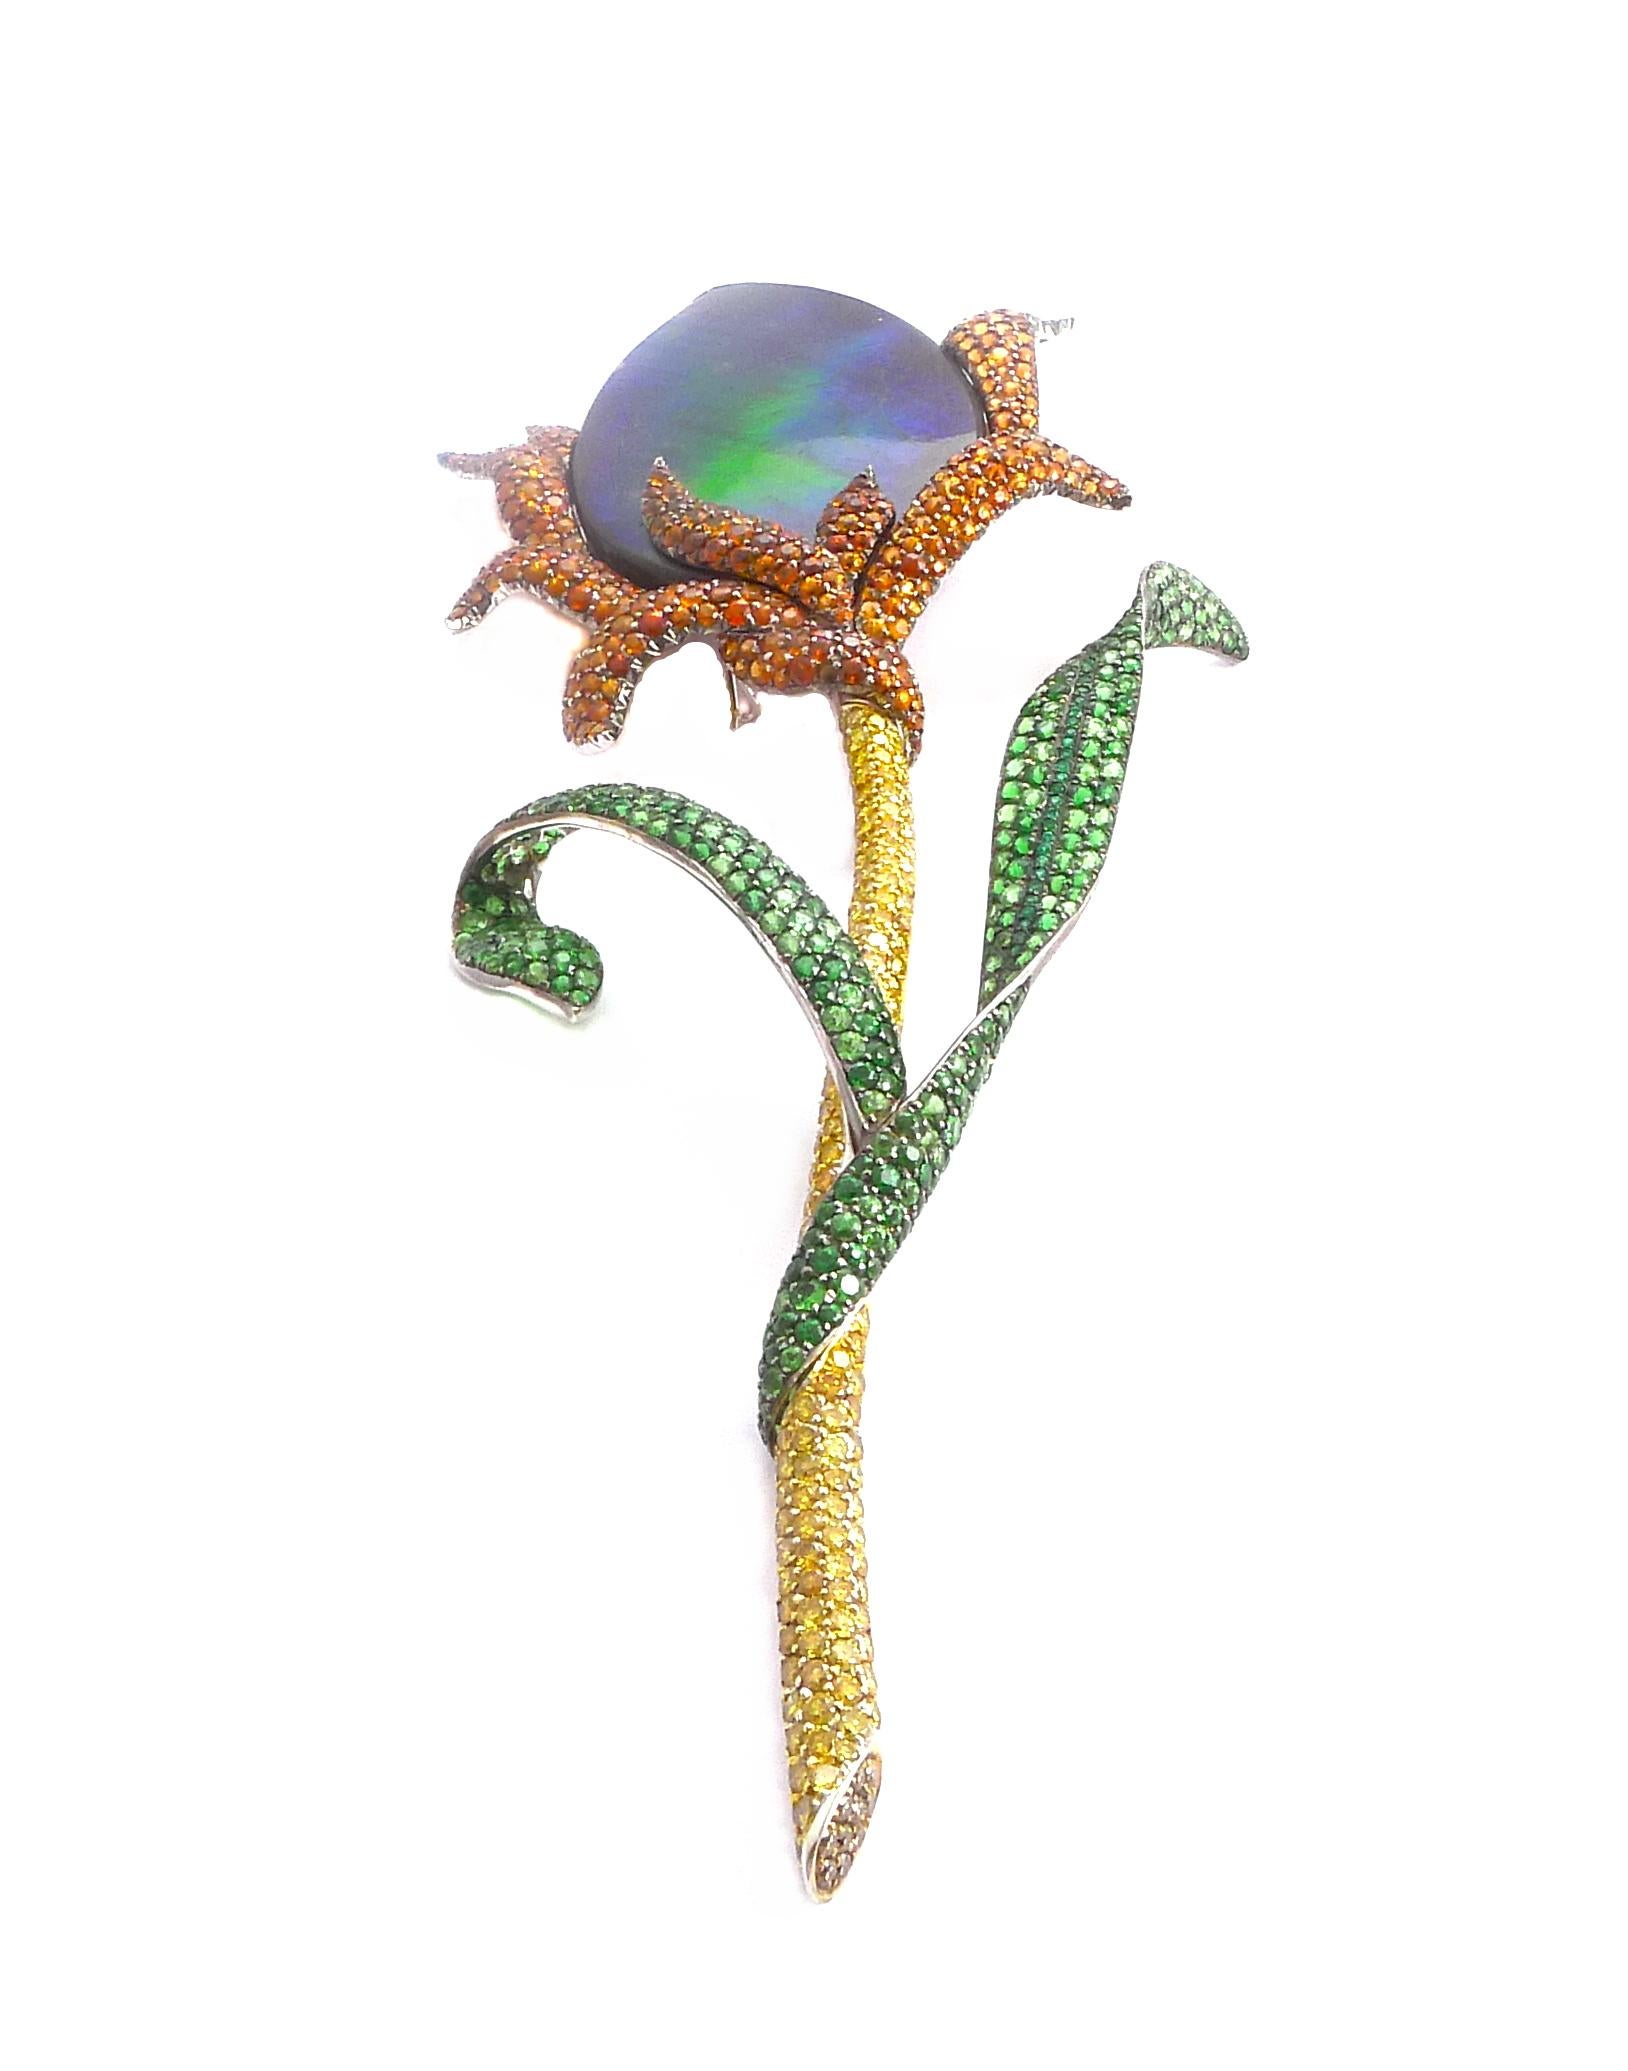 Designed as a flower centering an ammolite (fossilzed opal) surrounded by tsavorites, green garnets leaves and yellow diamonds stem

Mounted in 18k yellow gold

- 1 Ammolite (fossilzed opal): 109.47 ct
- Tsavorites: 13.60 ct total
- Green garnets: